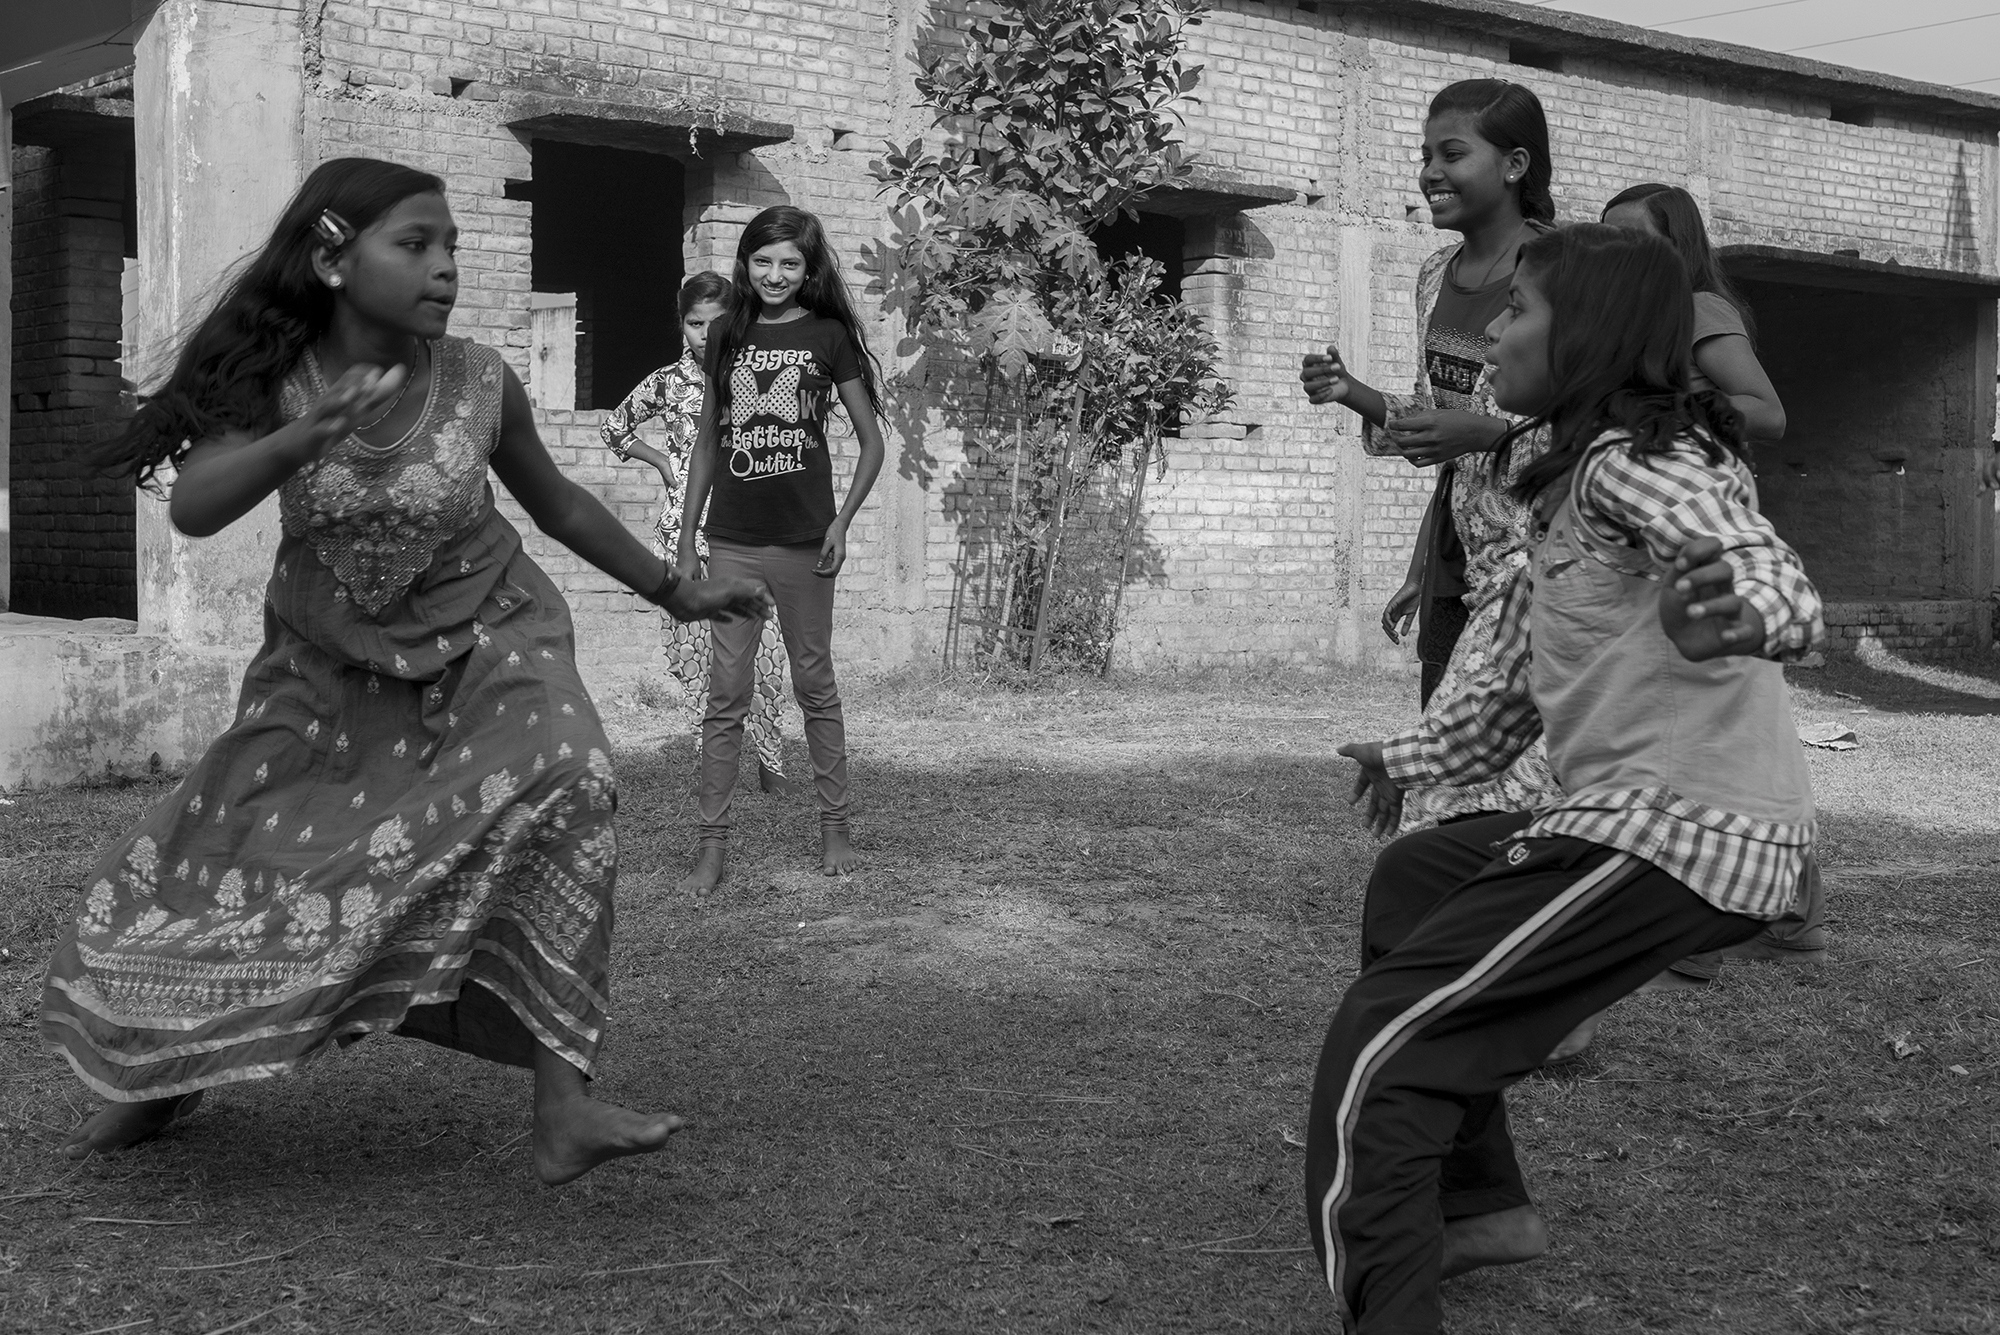 The Boarding School Saves Young Girls from Intergenerational Prostitution - Bihar, India -  "Girls at play during weekends inside the school...